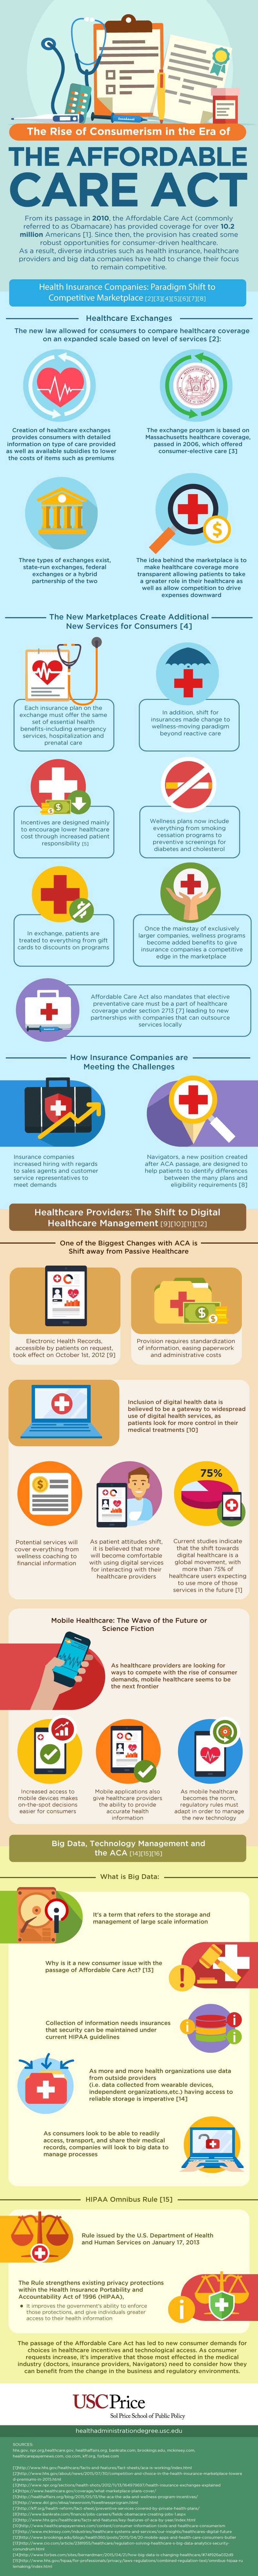 Infographic - Affordable Care Act